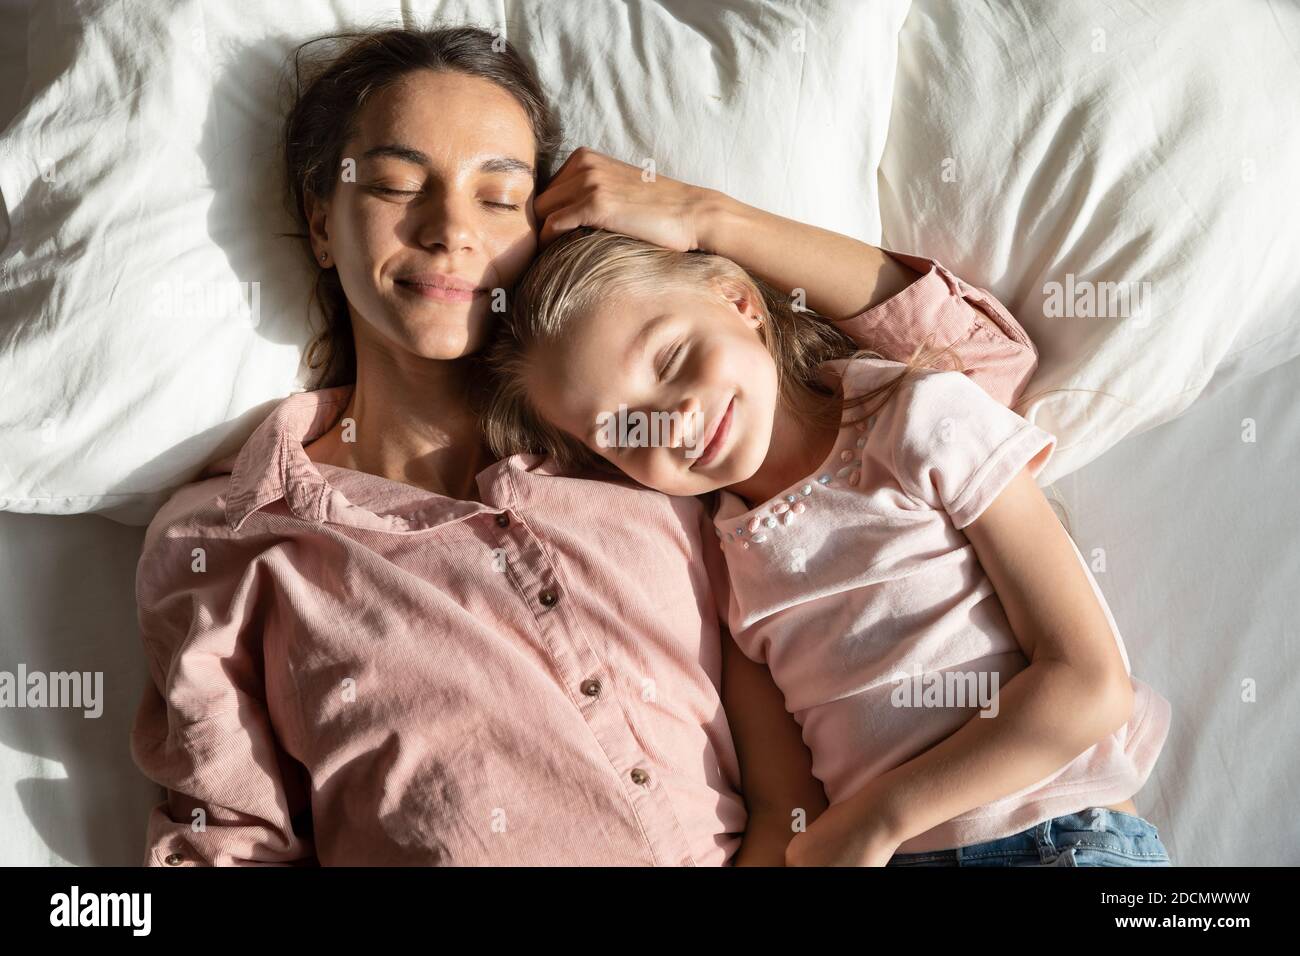 Calm mother and daughter sleeping together in bed, above view Stock Photo